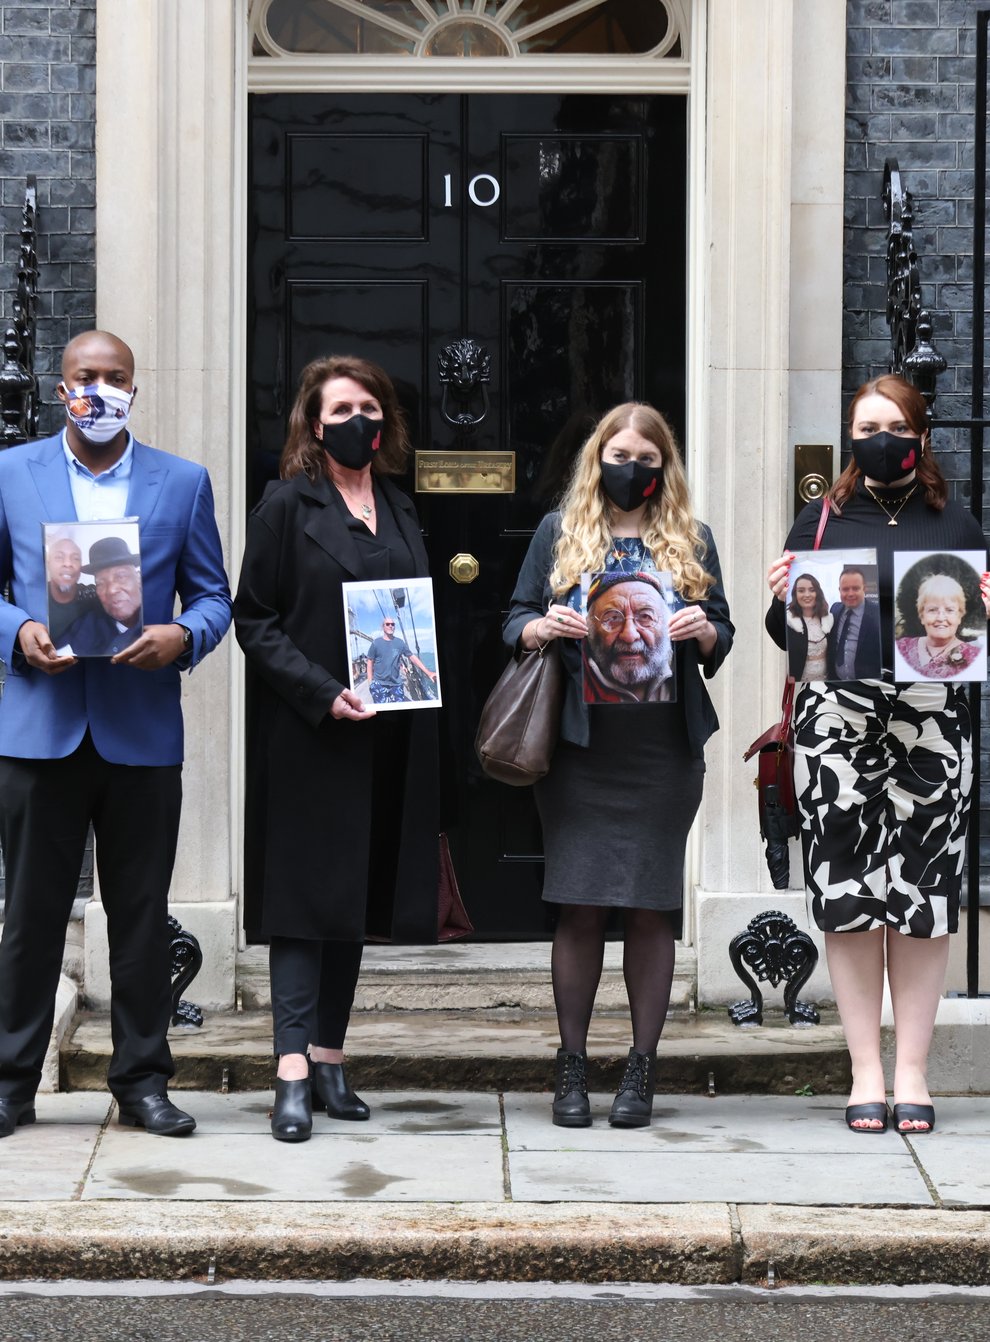 Members of the Covid-19 Bereaved Families for Justice group holding photos of loved ones outside 10 Downing Street, London, after their private meeting with Boris Johnson (James Manning/PA)